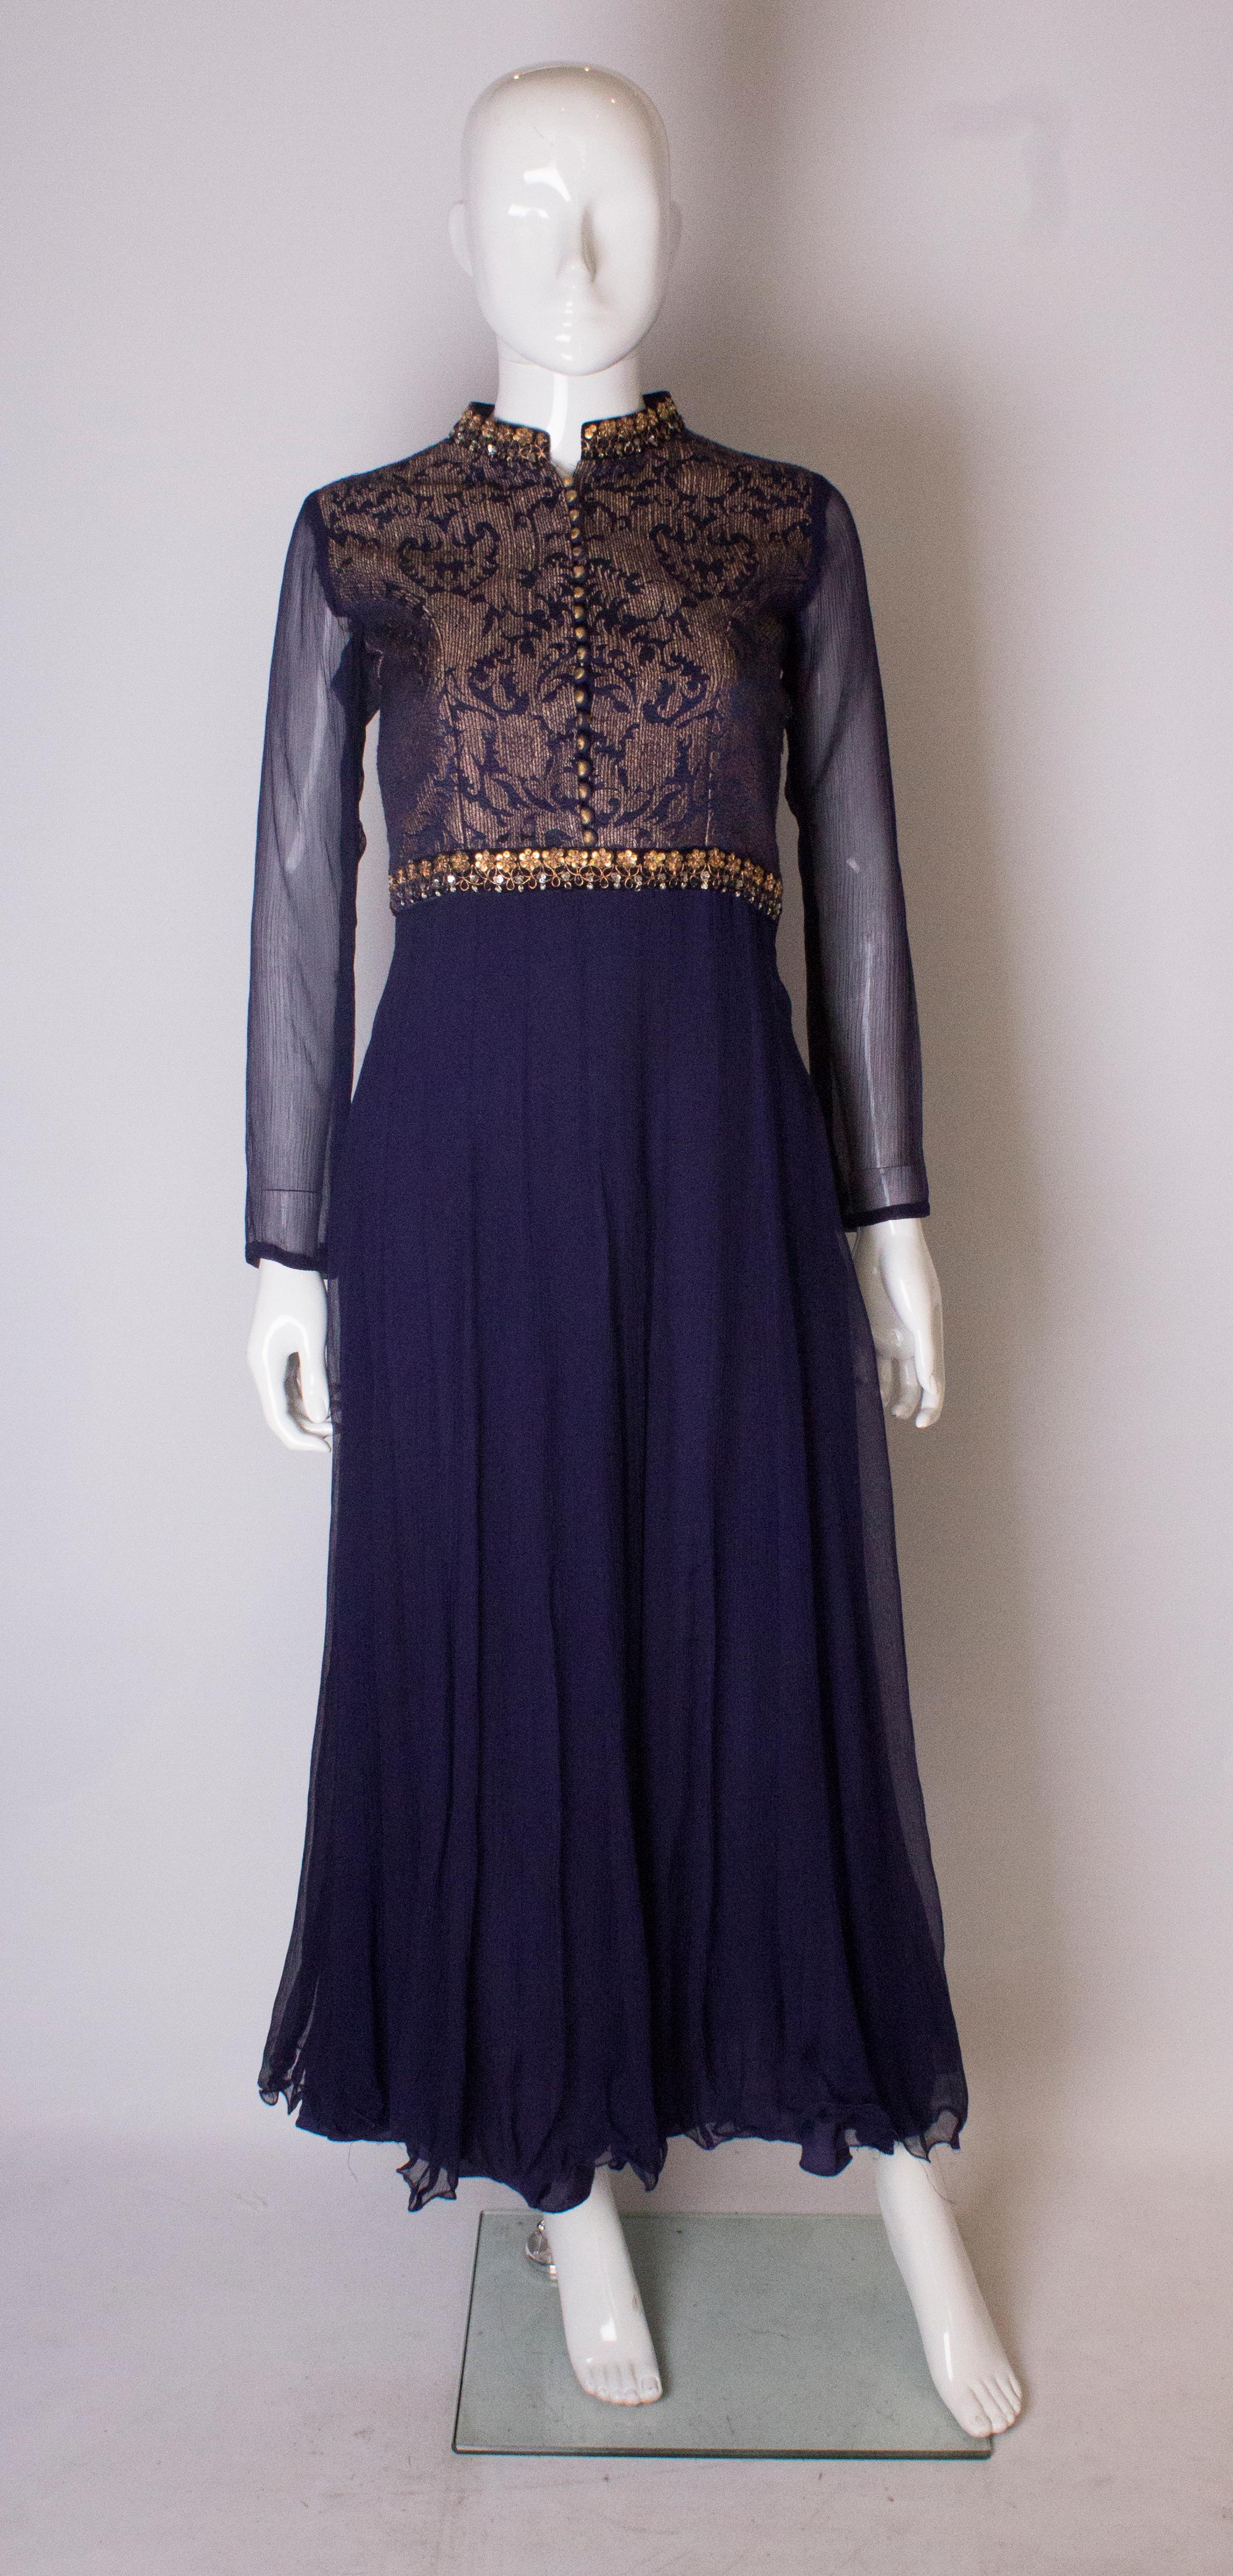 A stunning dress in silk chiffon and a brocade like fabric. The dress has a gold bodice, with fabric covered buttons, and braid detail. The skirt and sleeves are in silk chiffon. The dress is fully lined.